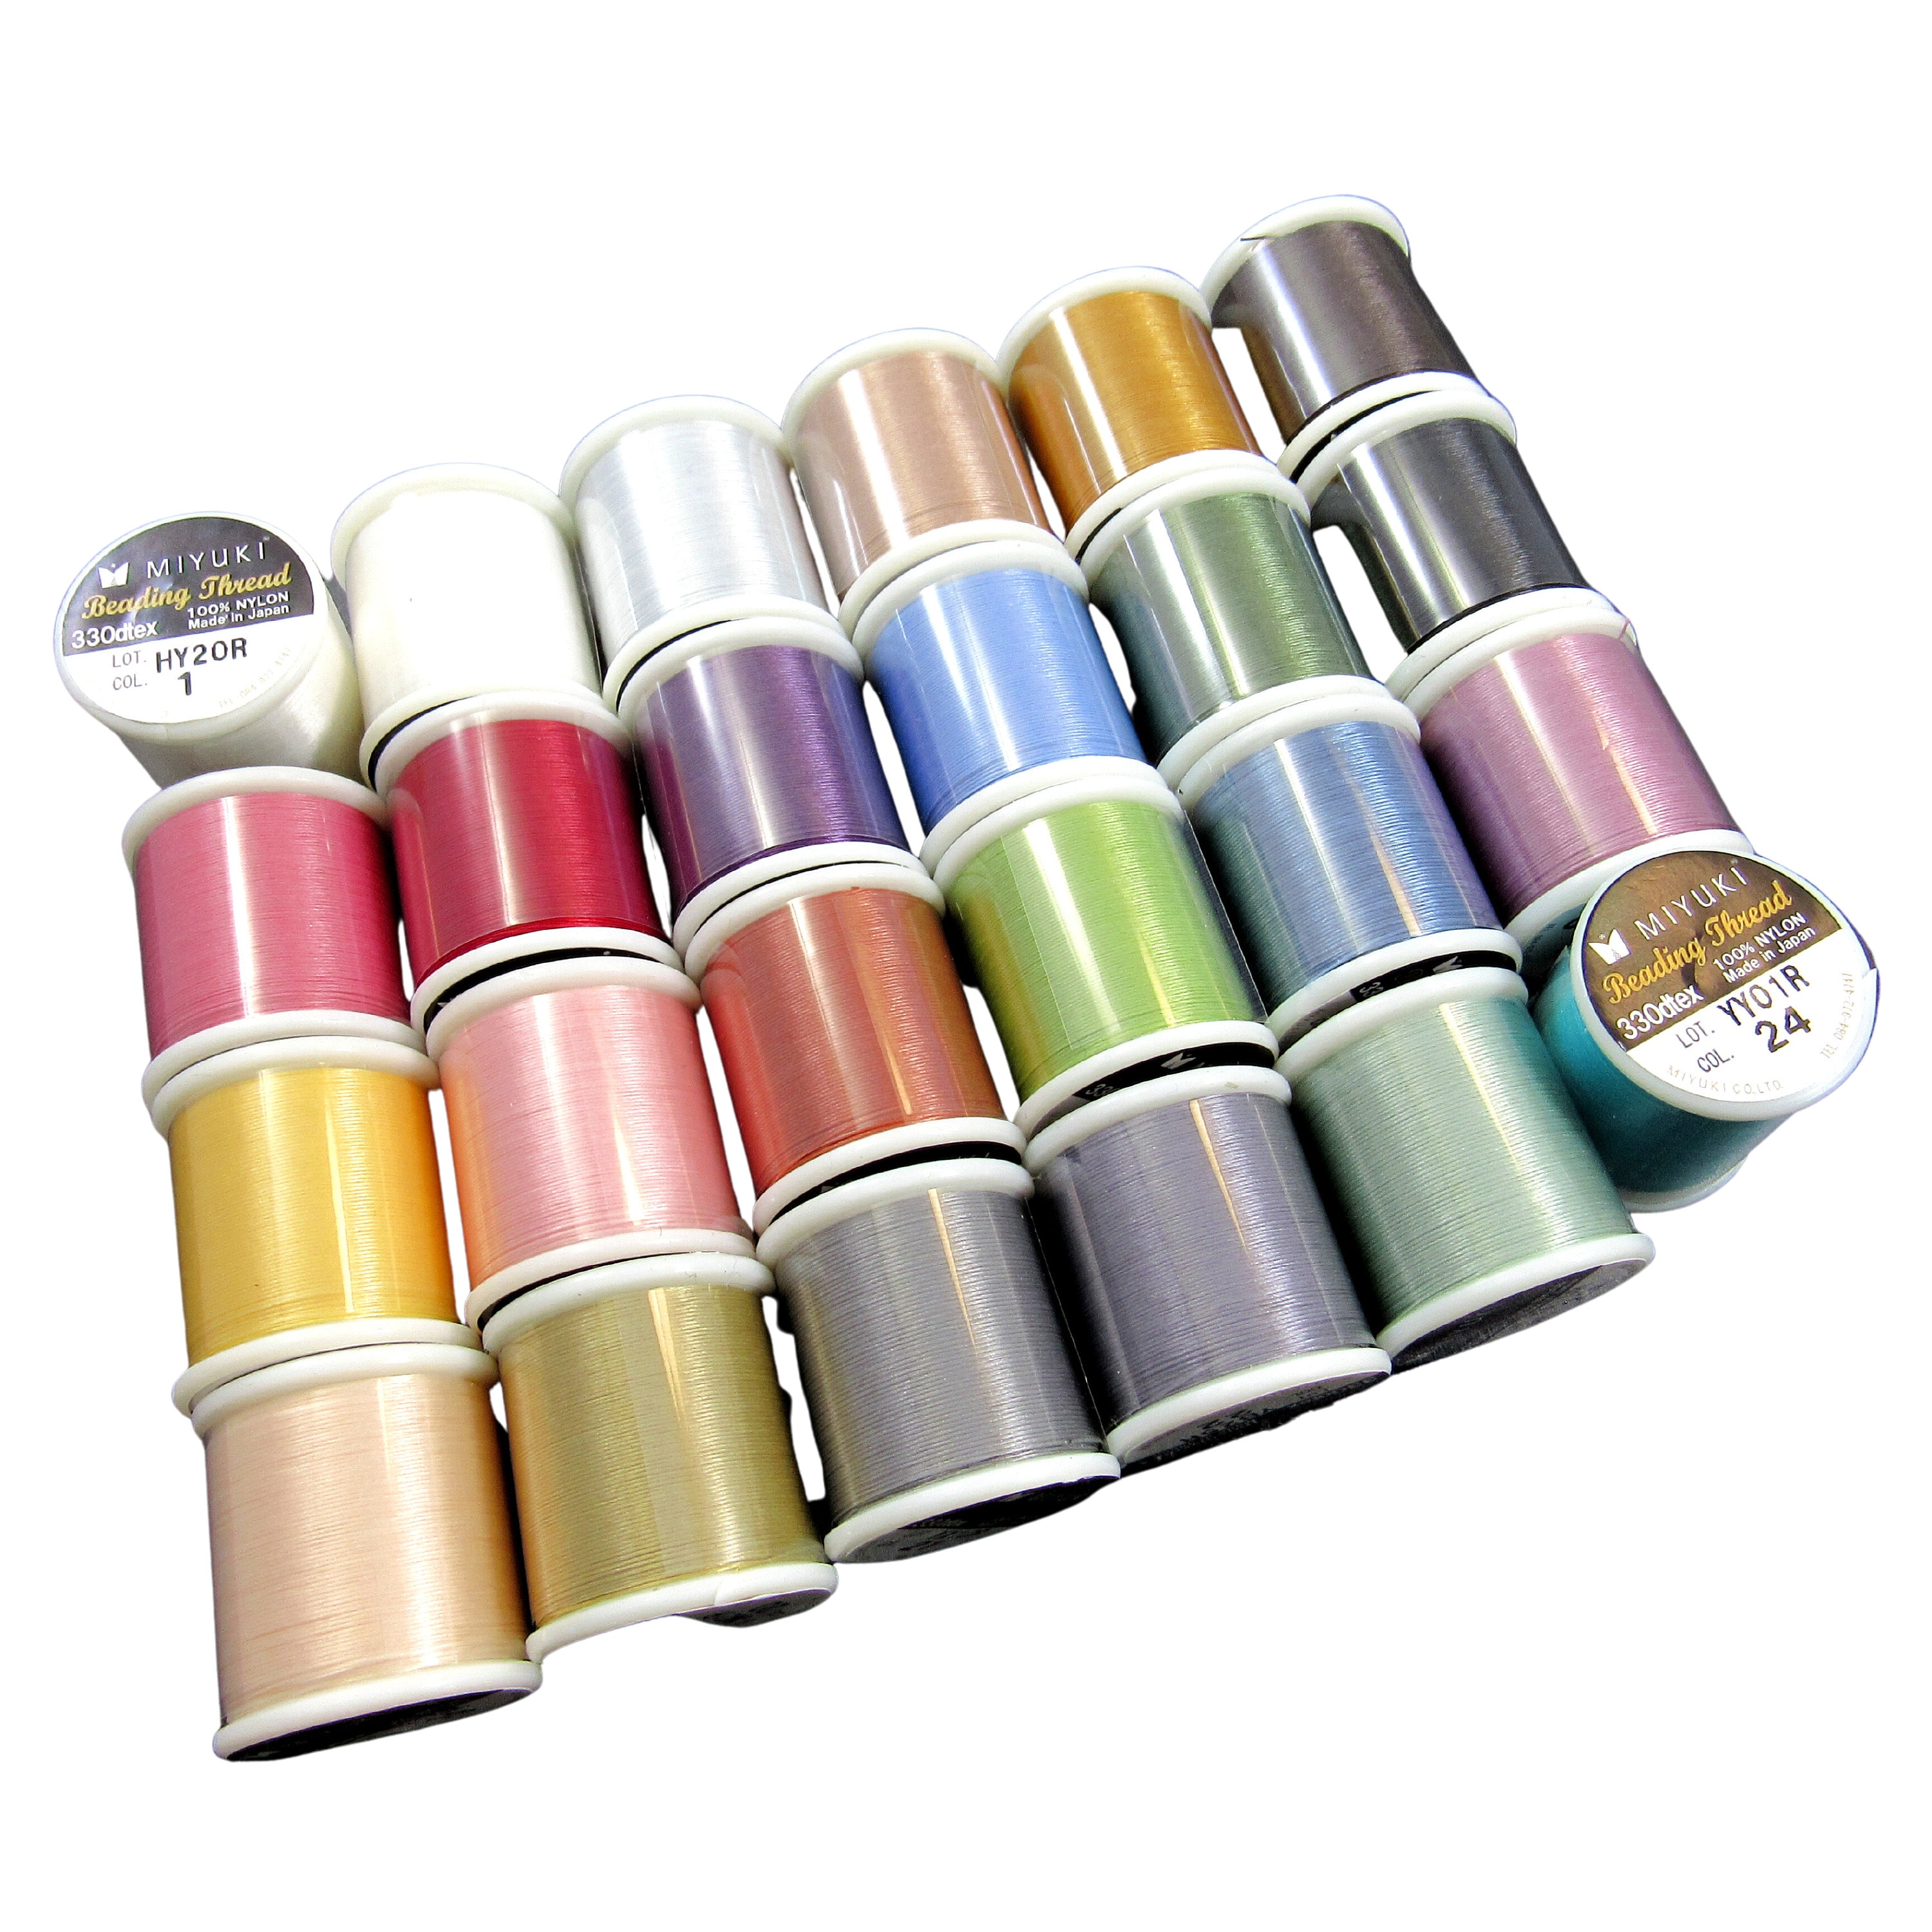 Lisa Yang Jewelry : What is the Best Thread for Beading? Nymo, FireLine or  Something Else?